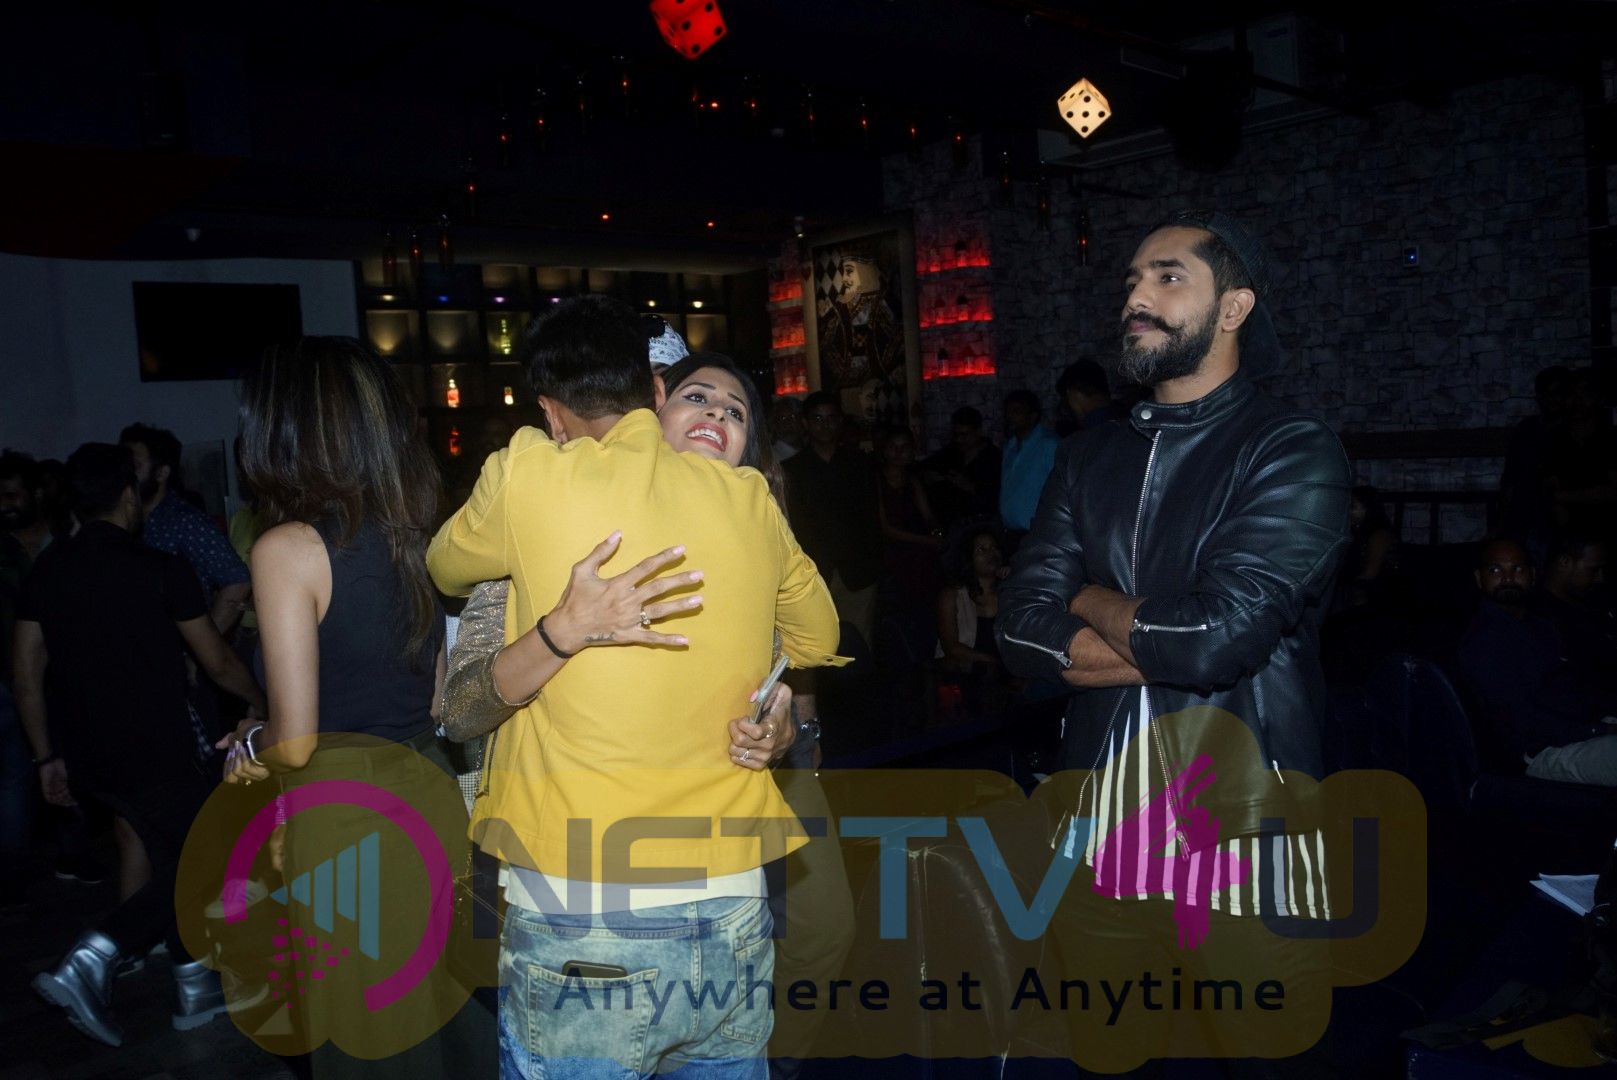 The Launch Of Kasino Bar And Launch Of Meet Bros Song 'Love Me' Stills Hindi Gallery